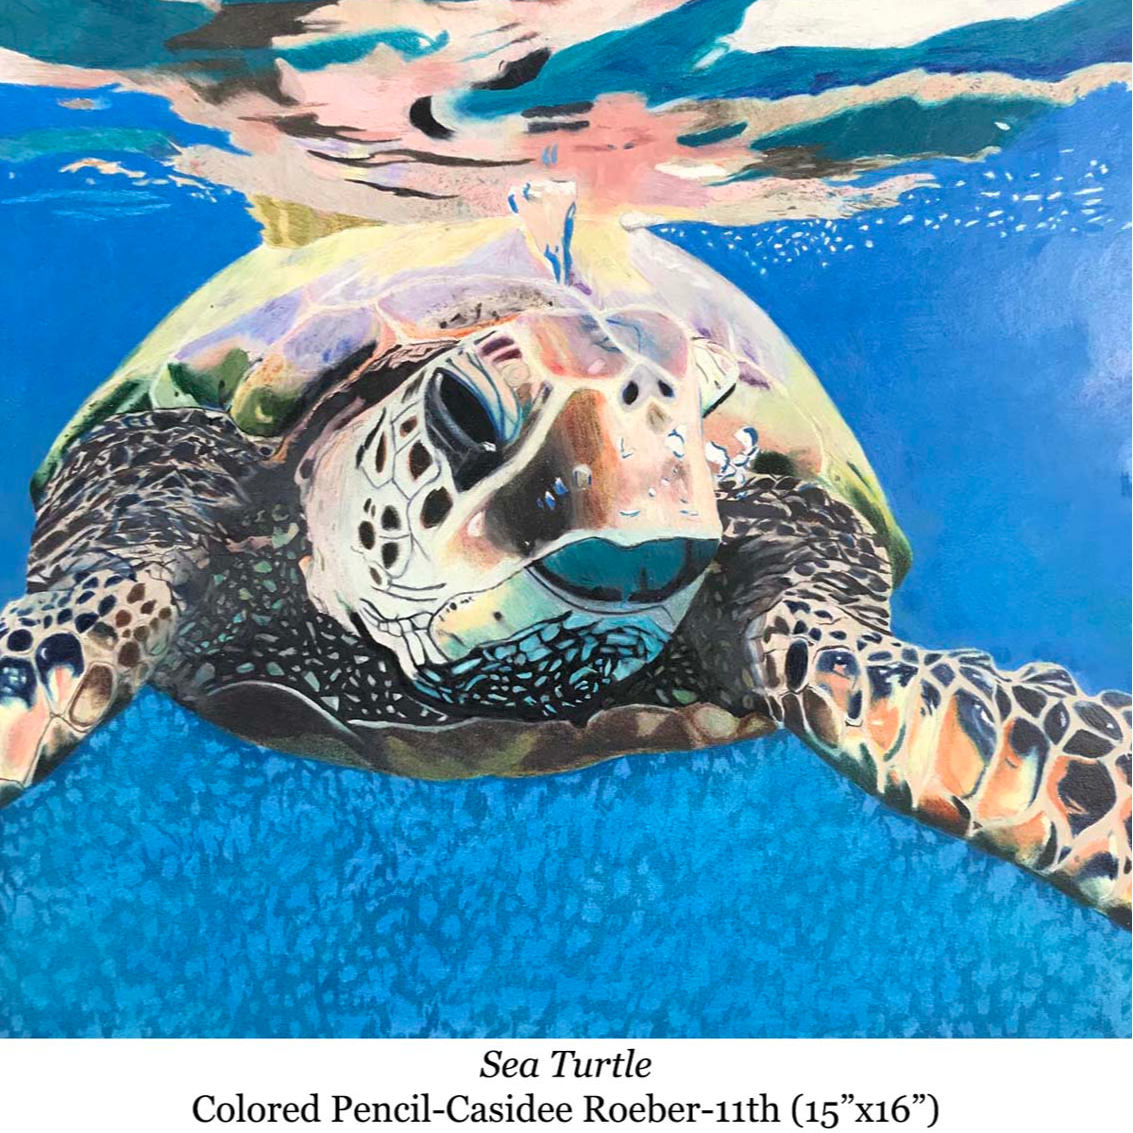 a drawing of a seaturtle